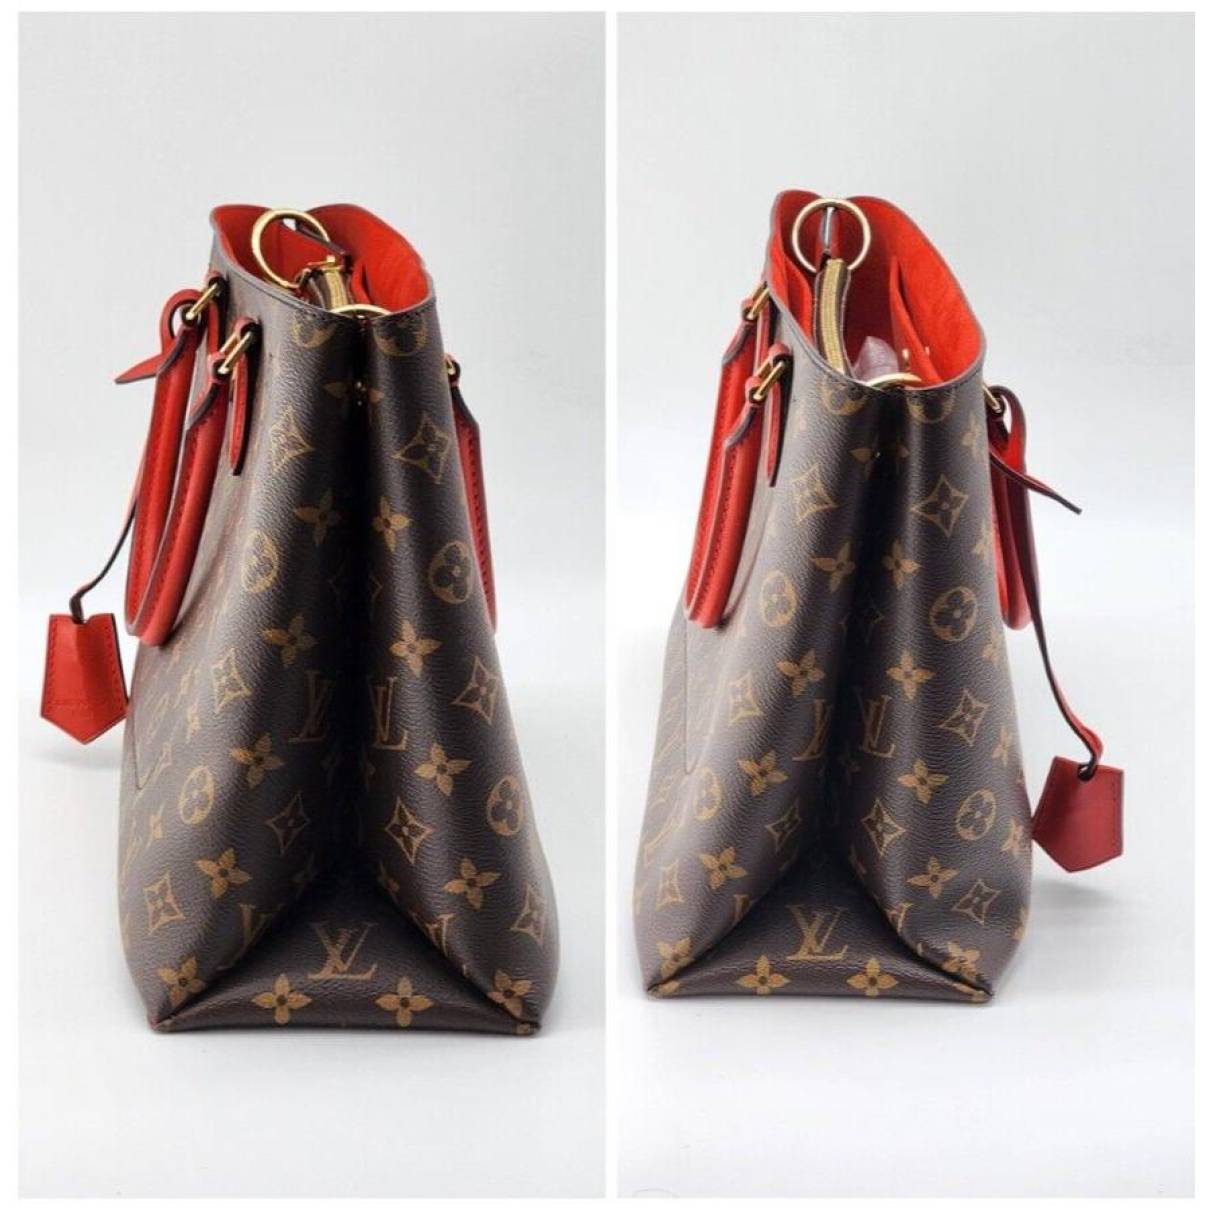 Louis Vuitton - Authenticated Flower Tote Handbag - Cotton Brown for Women, Very Good Condition